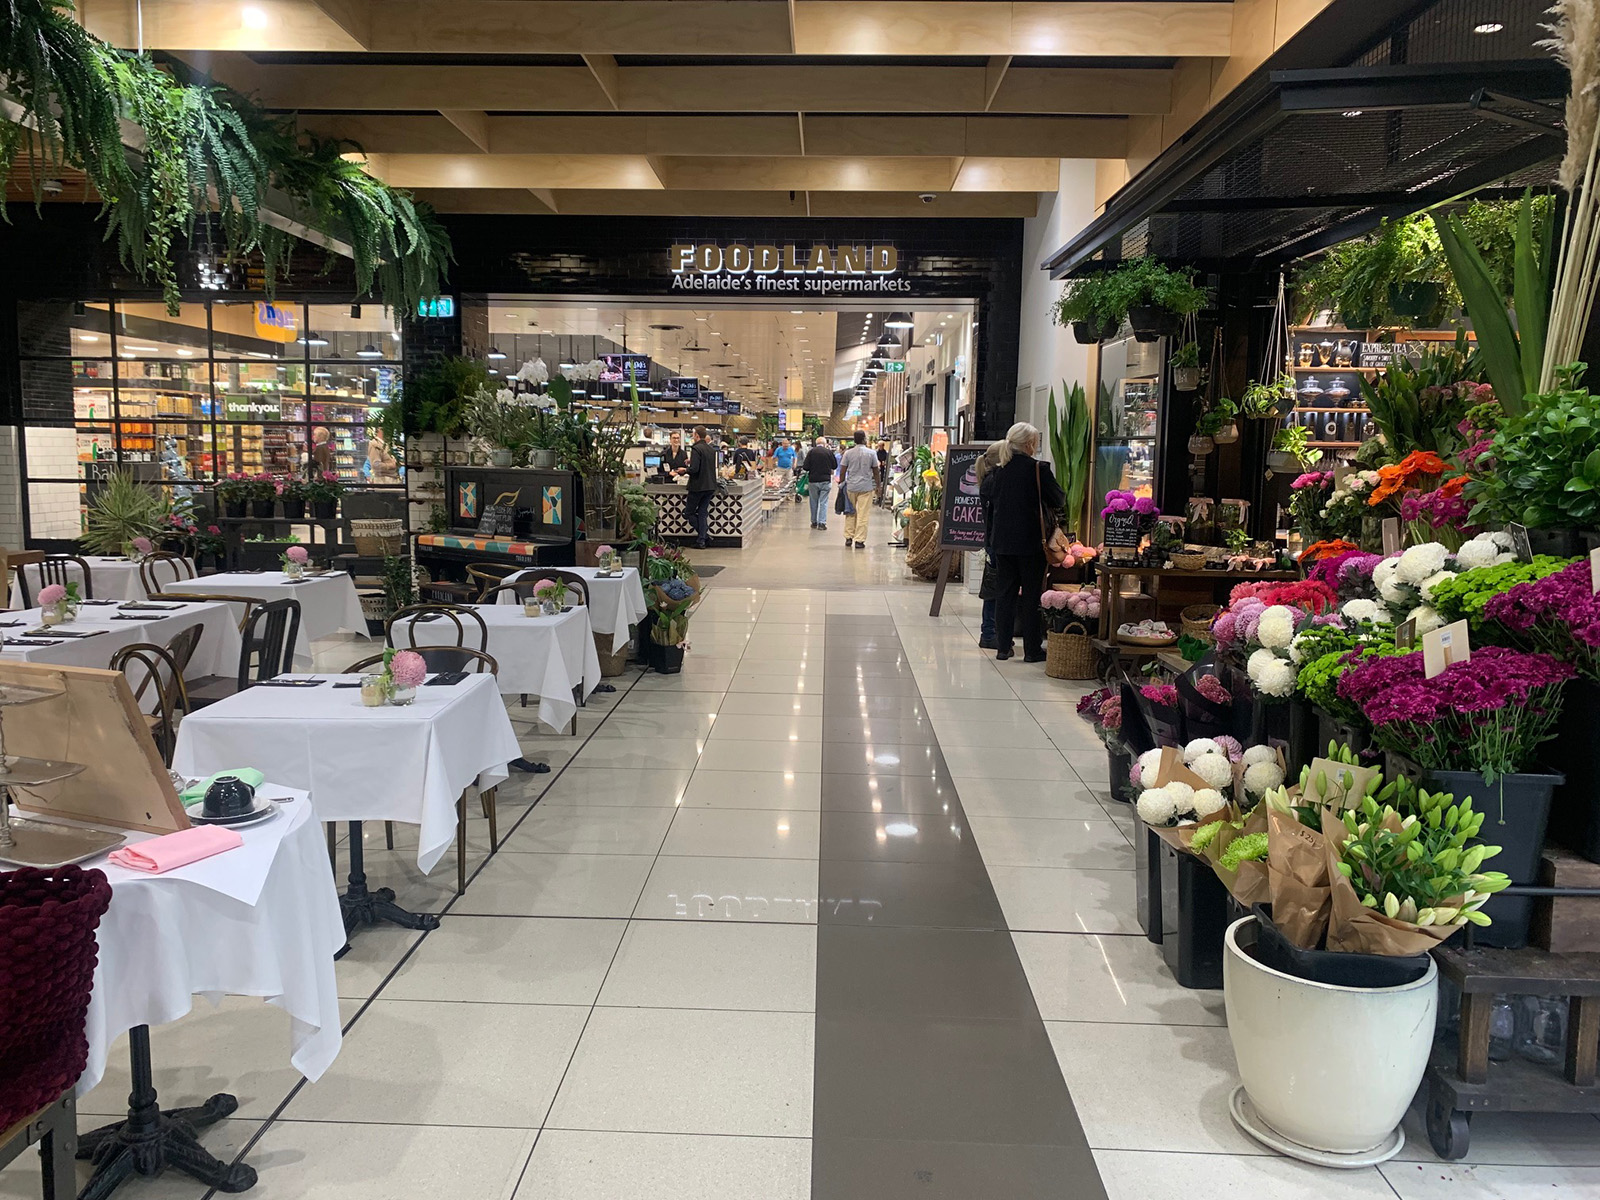 Adelaide’s finest supermarkets | The grocery run that [eco friendly] dreams are made of